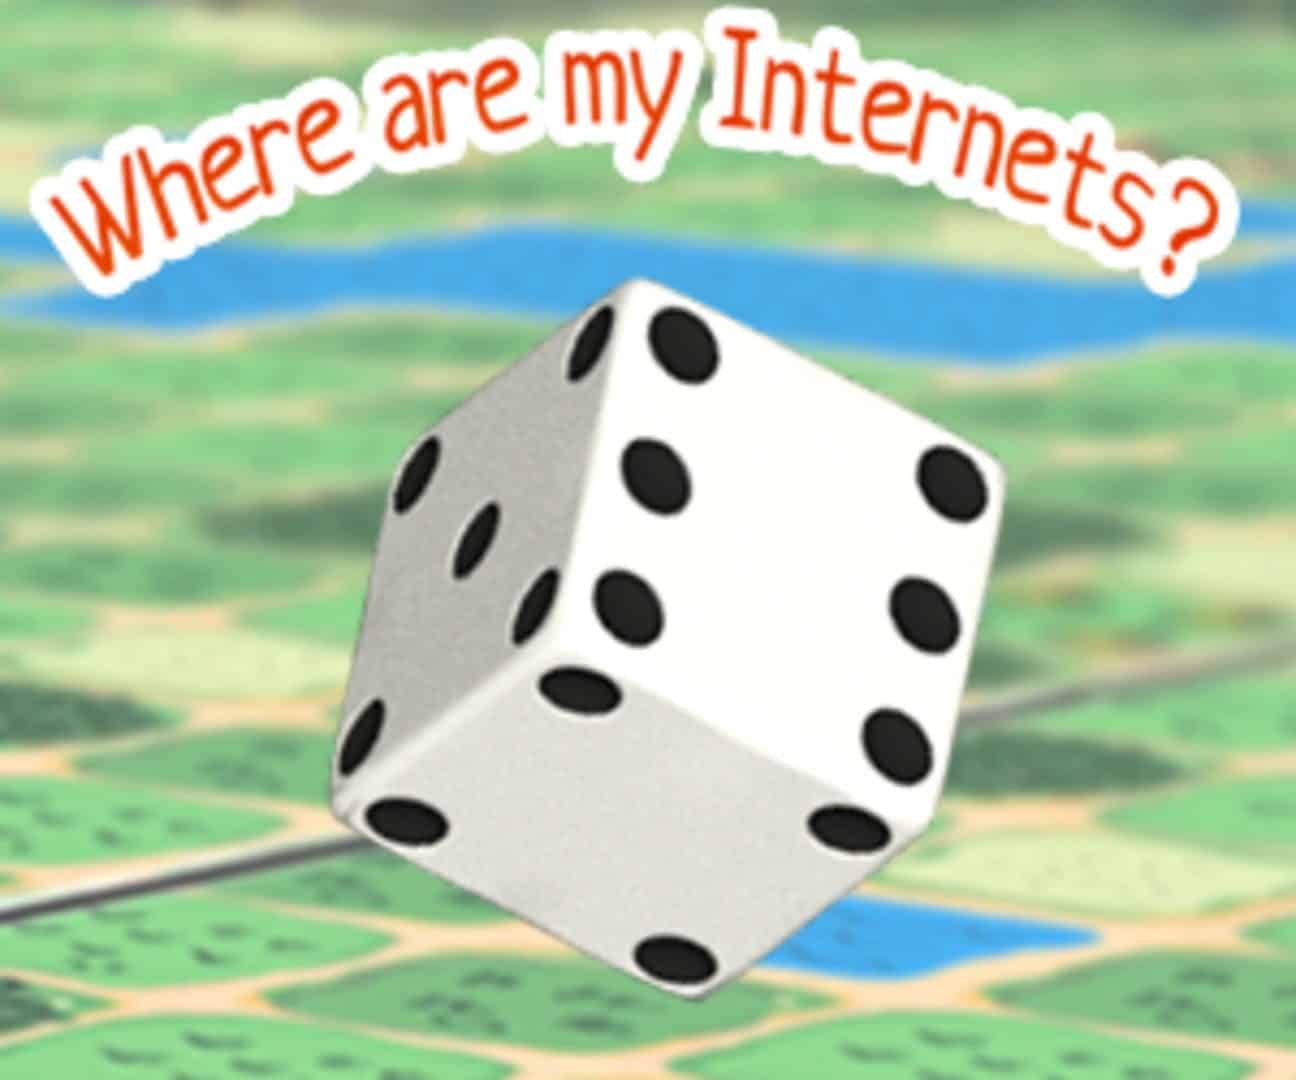 Where are my Internets?